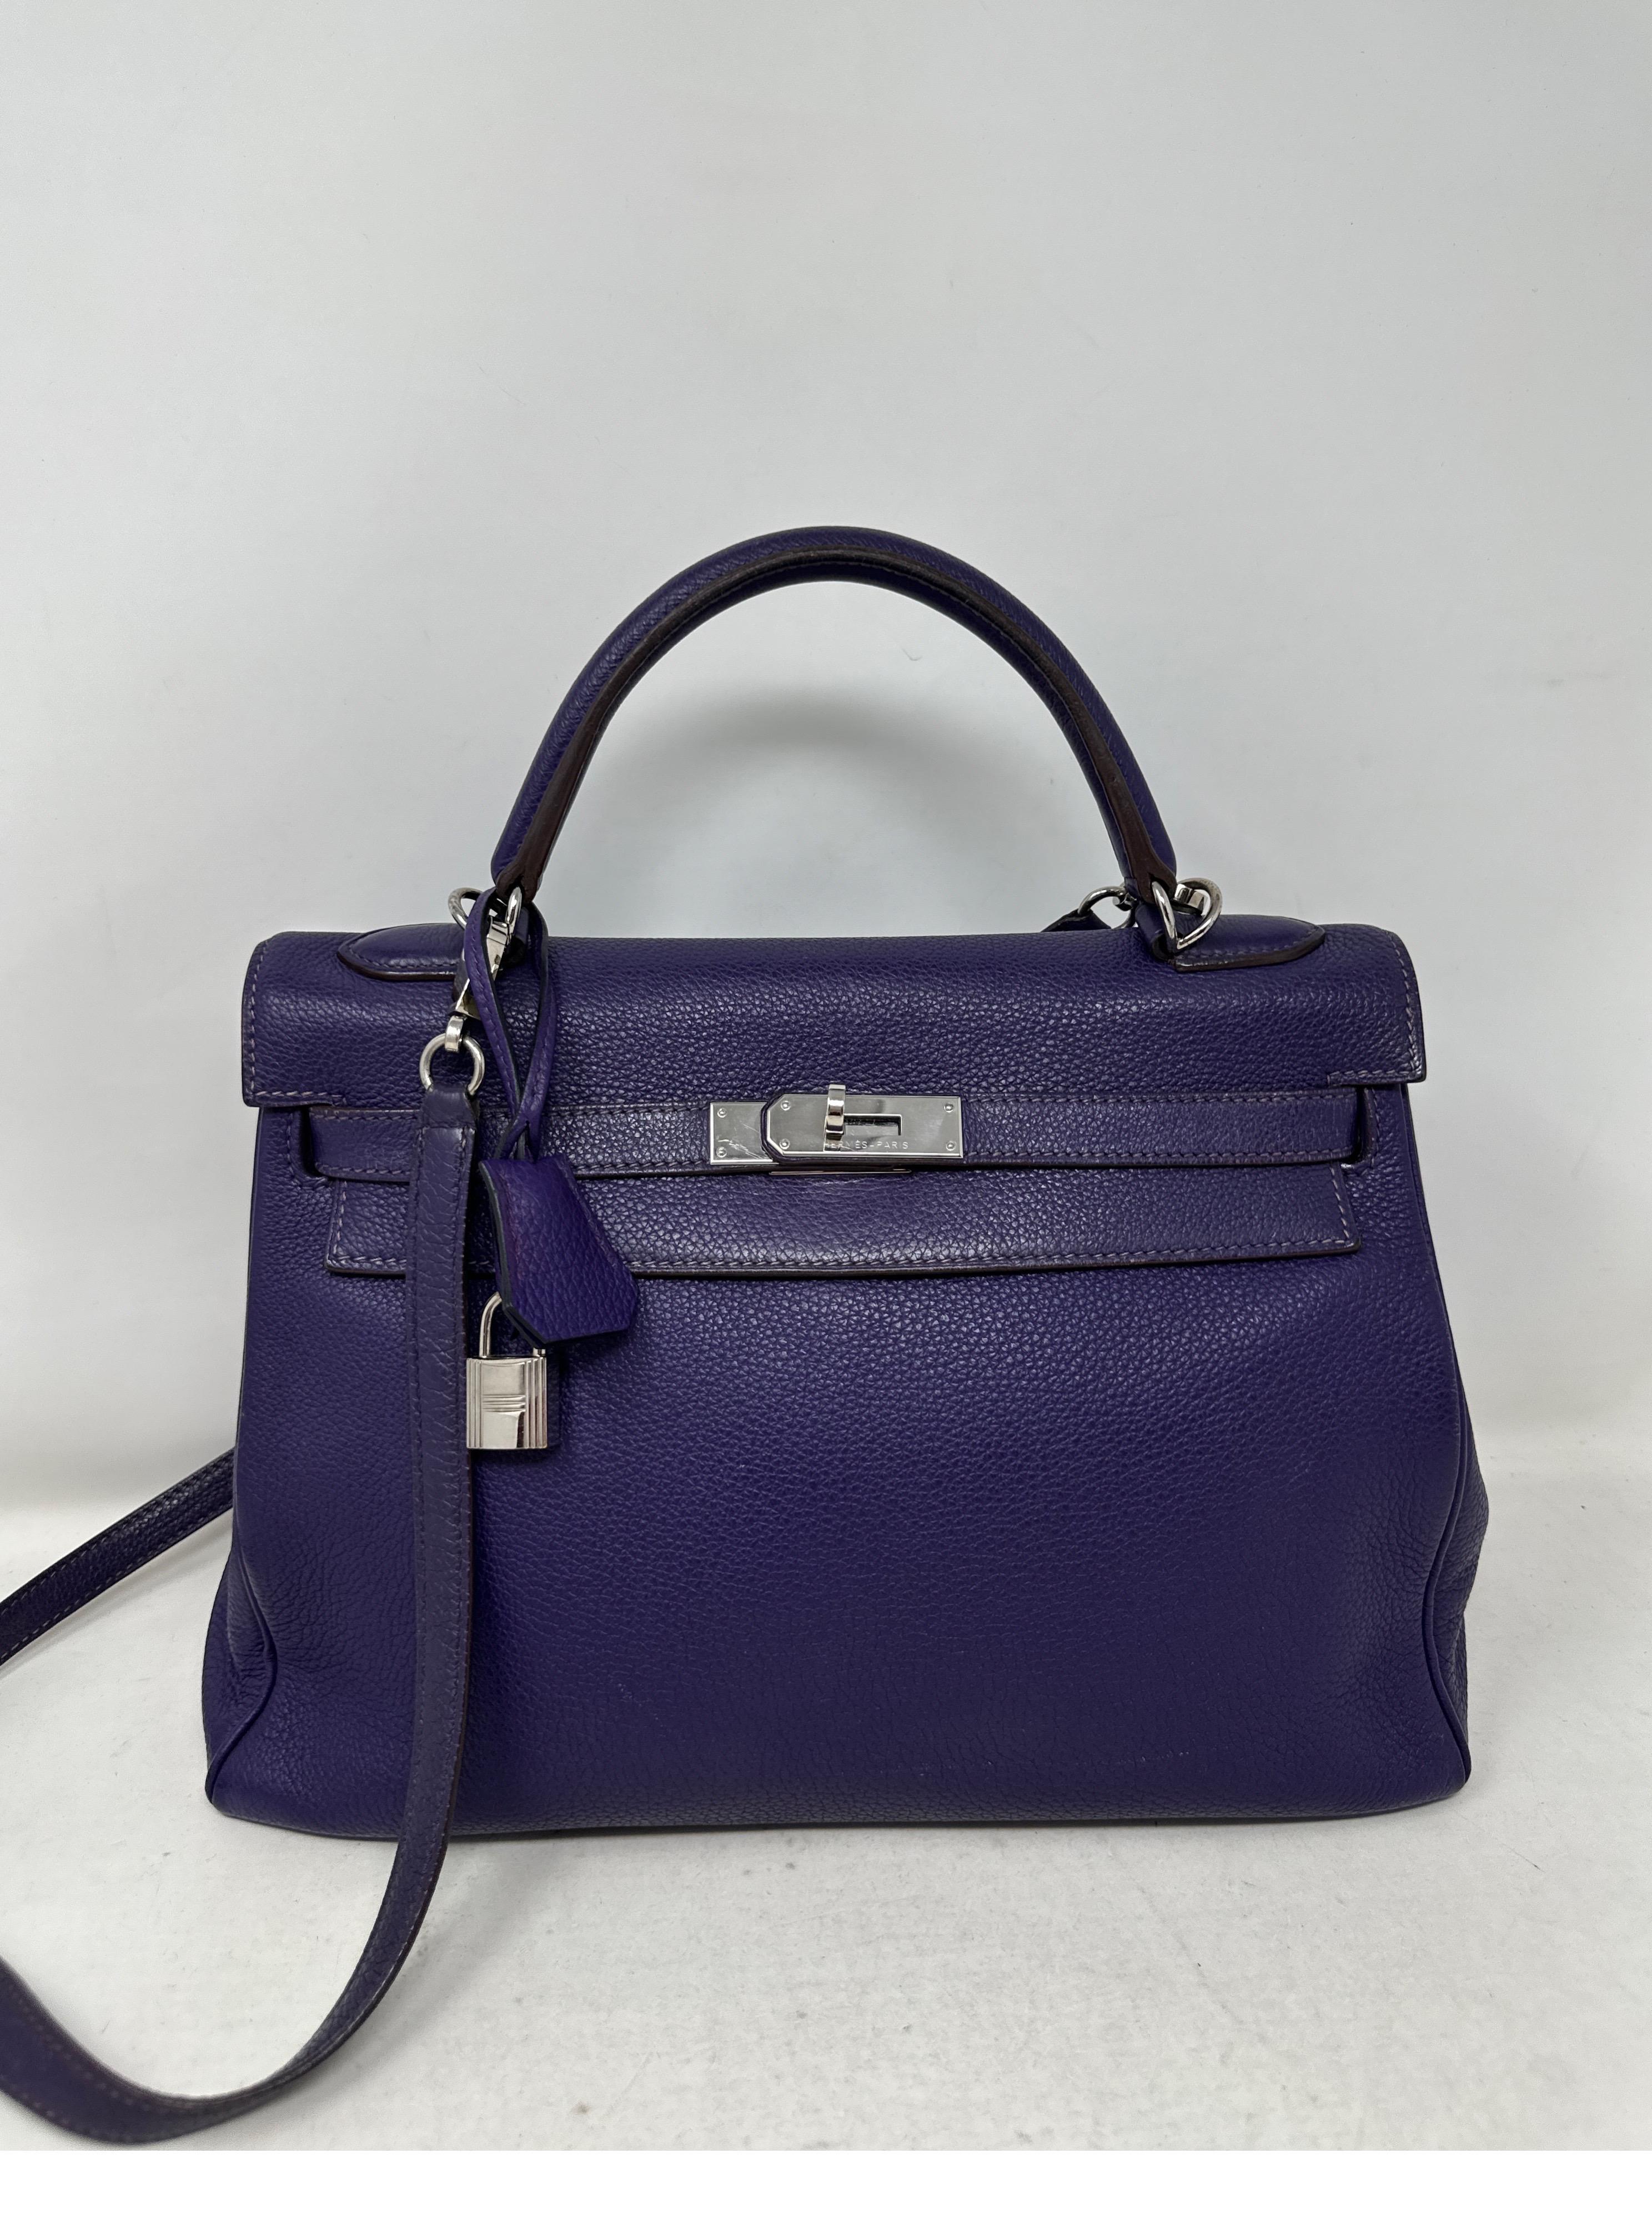 Hermes Purple Kelly 32 Bag In Good Condition For Sale In Athens, GA